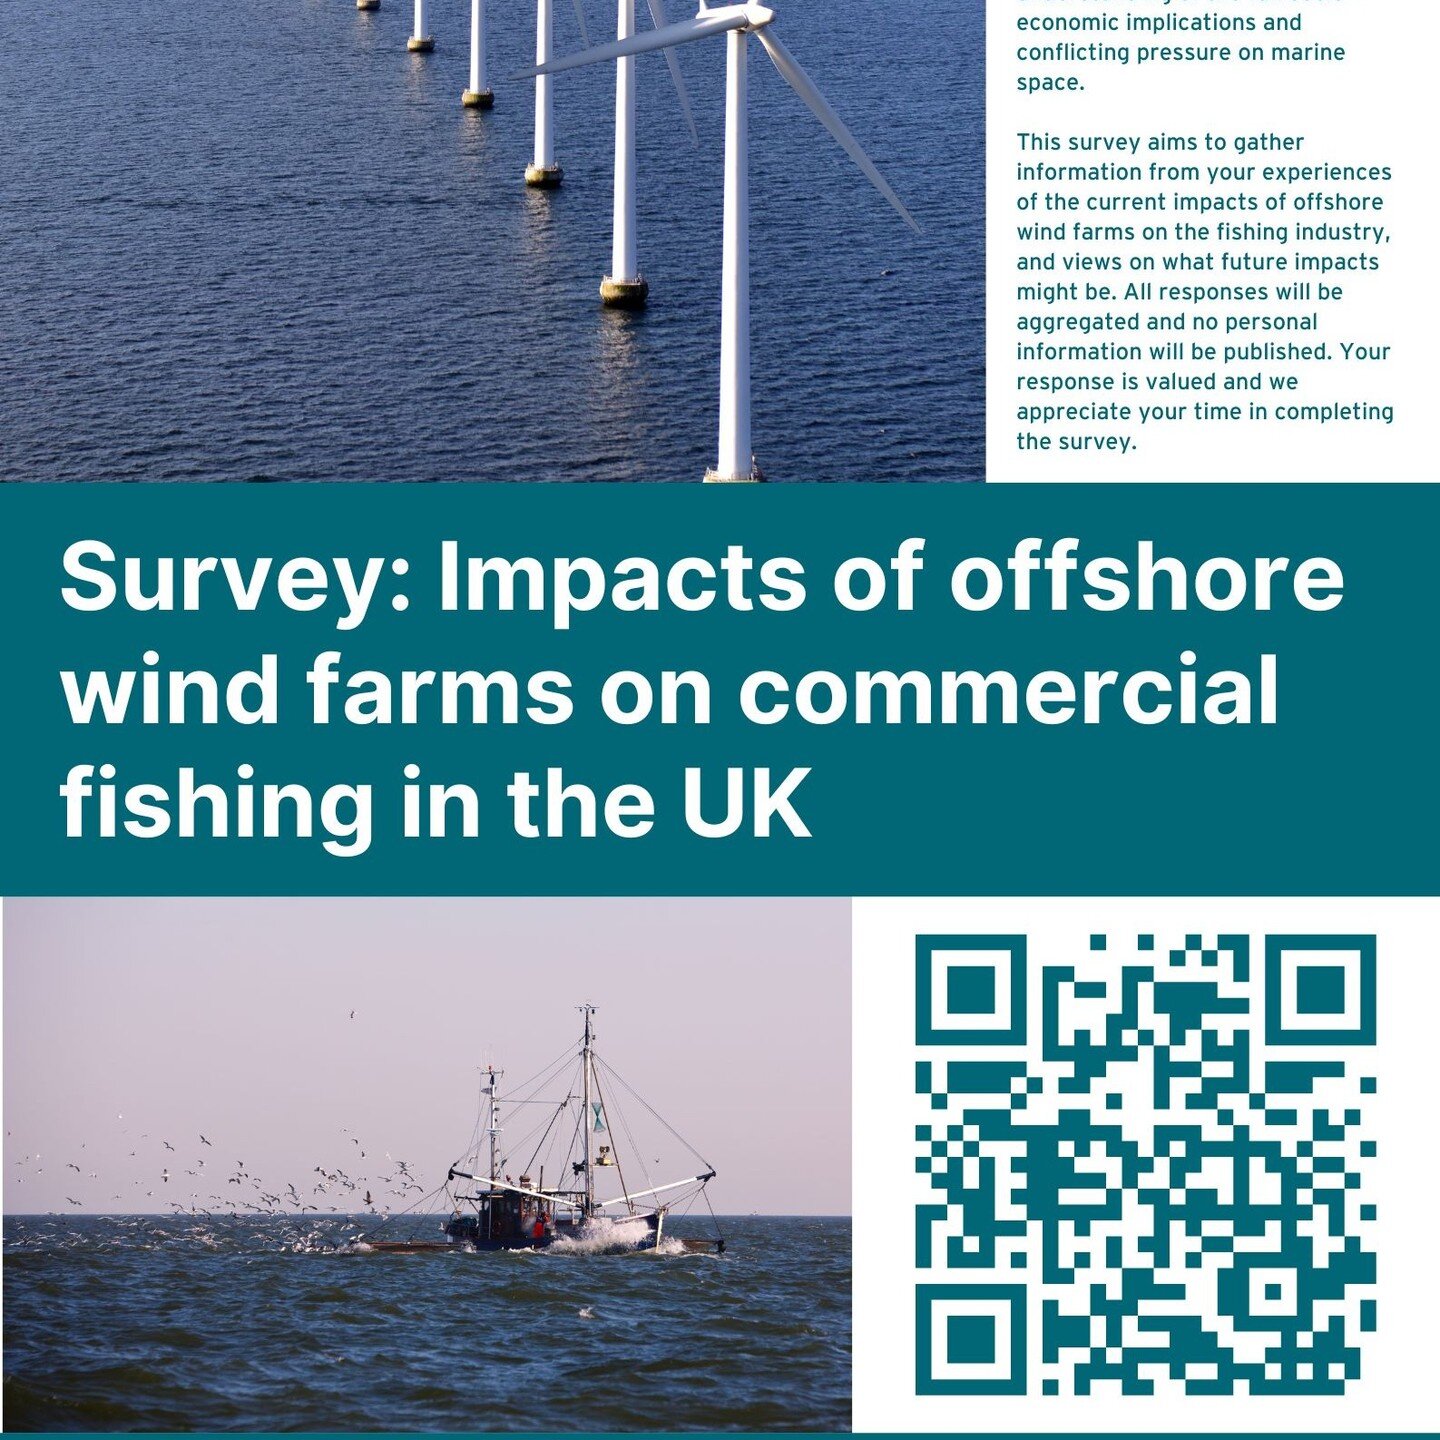 SURVEY: Impacts of offshore wind farms on commercial fishing in the UK: If you have time please do consider completing the survey - your views will be greatly valued and appreciated.
#fishing #windfarming #renewableenergy #commercialfishing #offshore